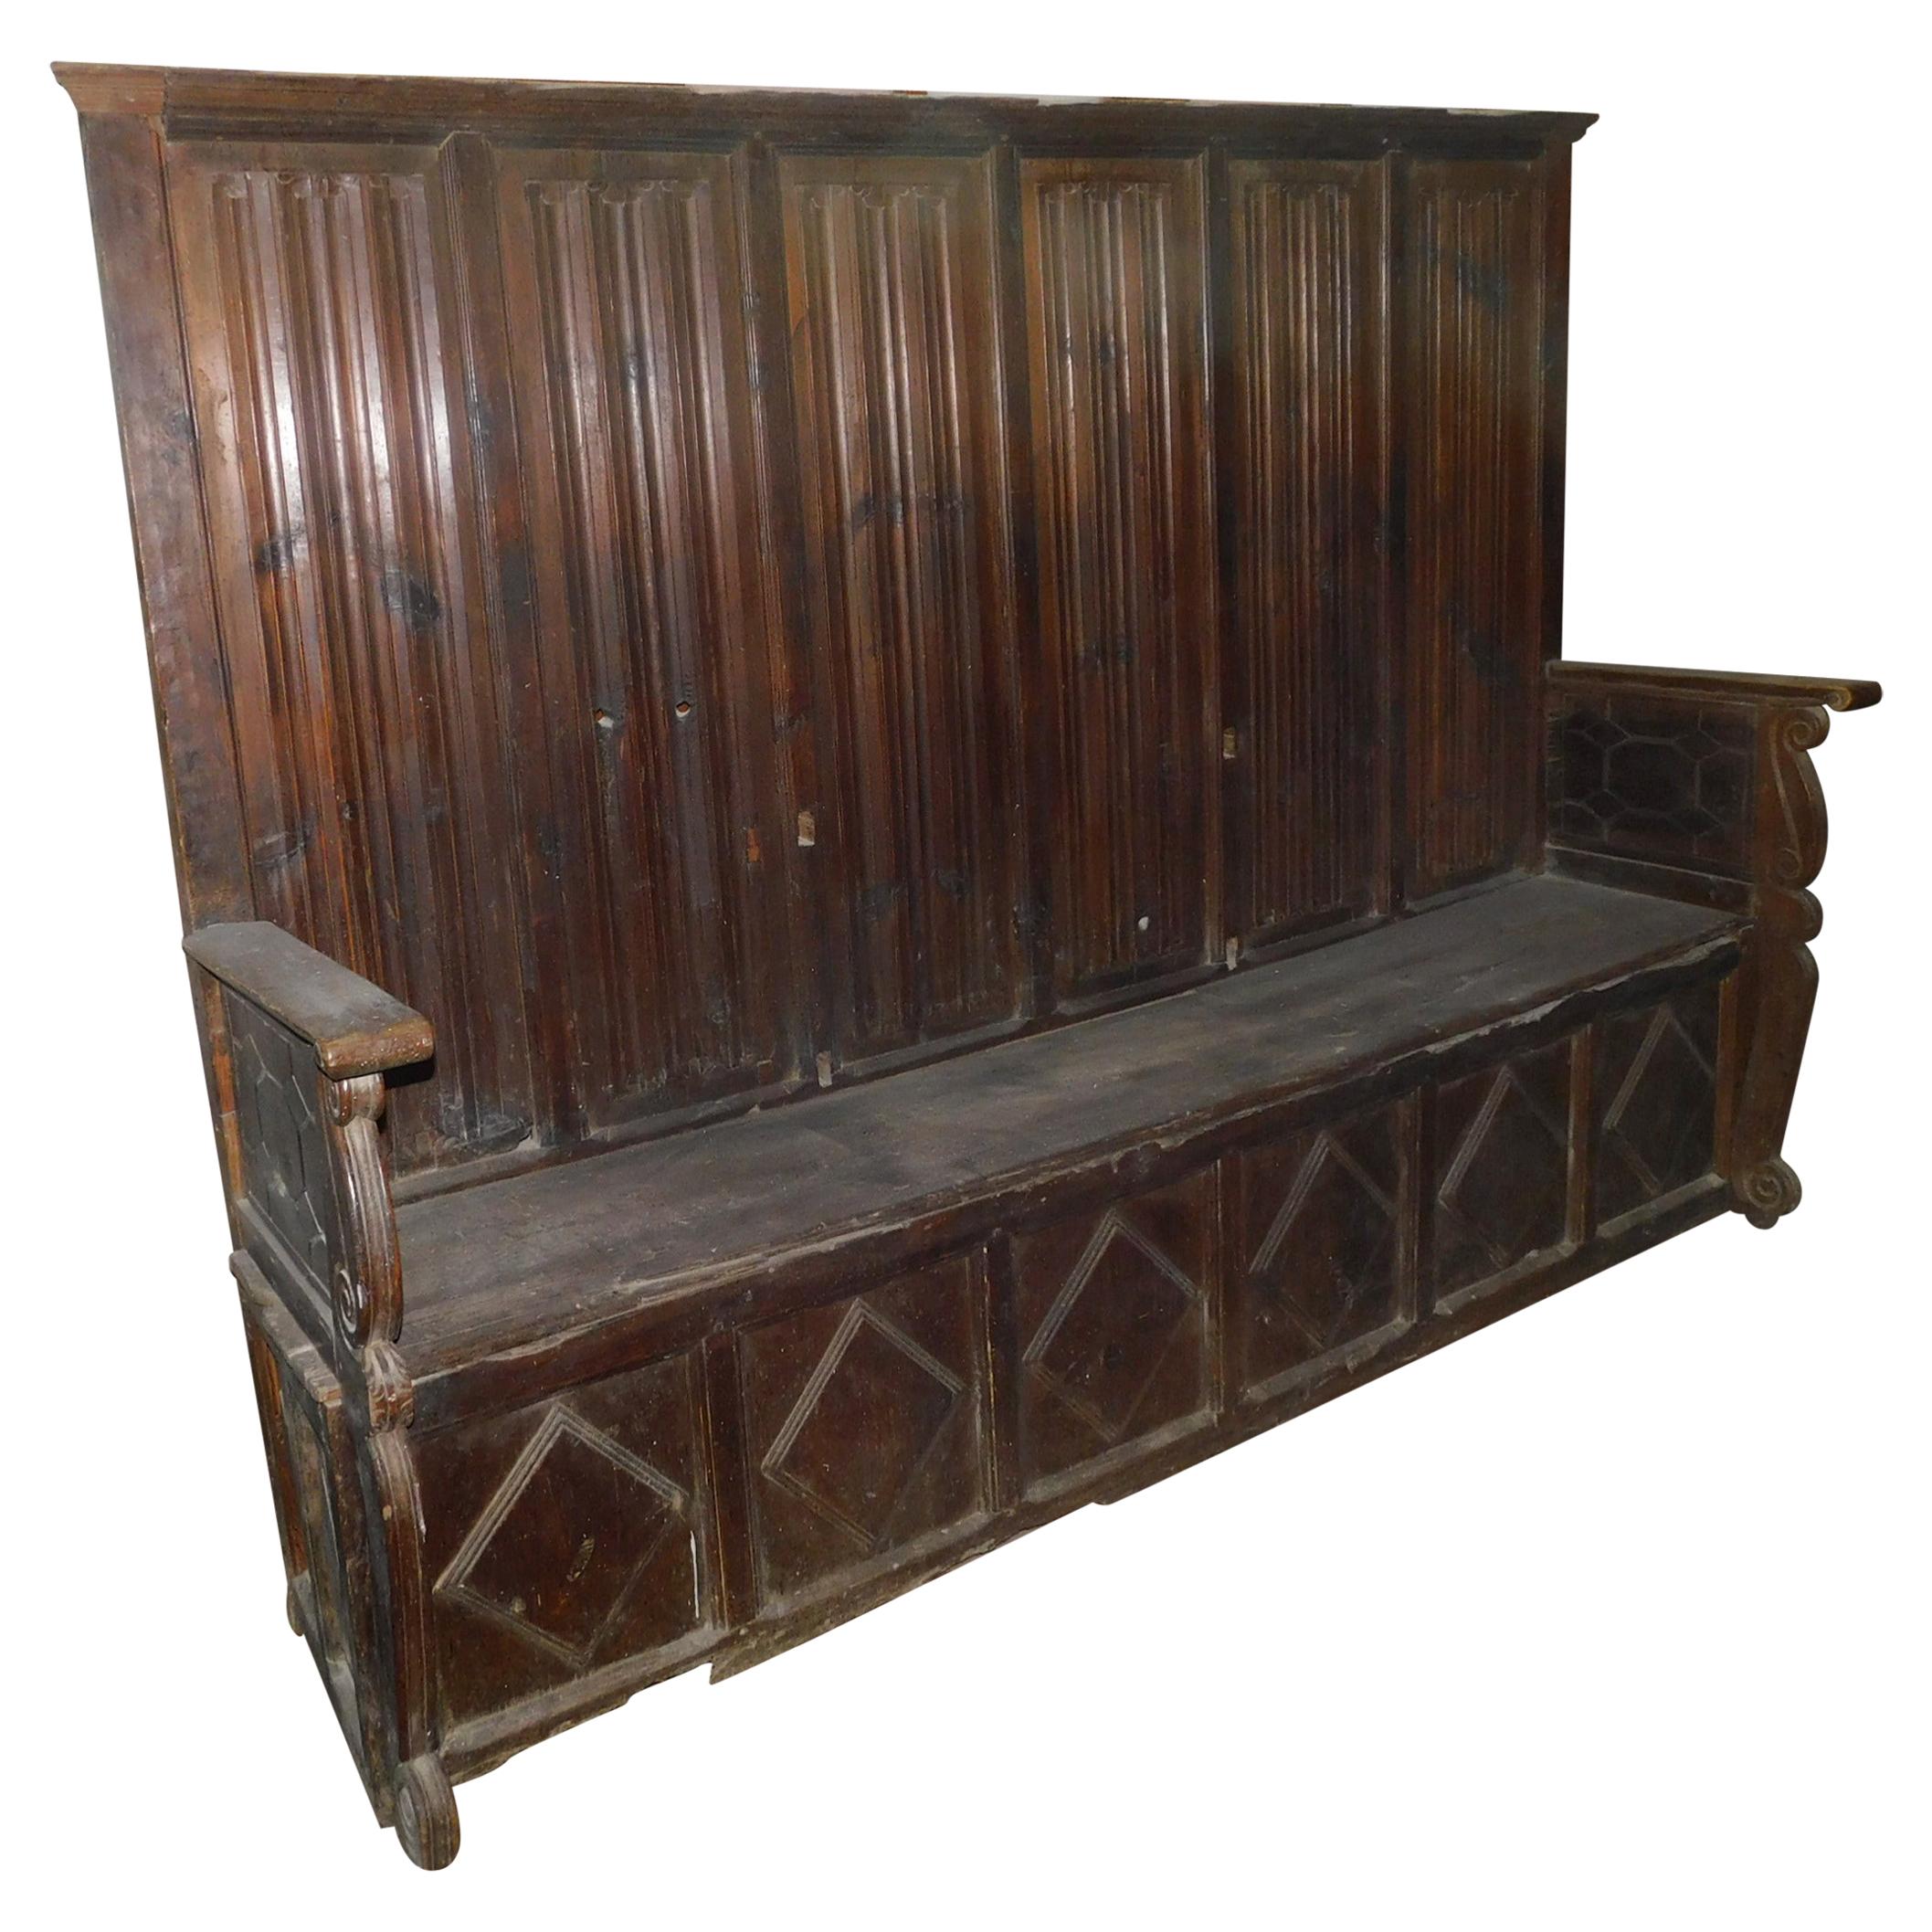 Antique High Back Bench, Red Larch Wood, Hand Carved with Lozenges, 1500 Italy